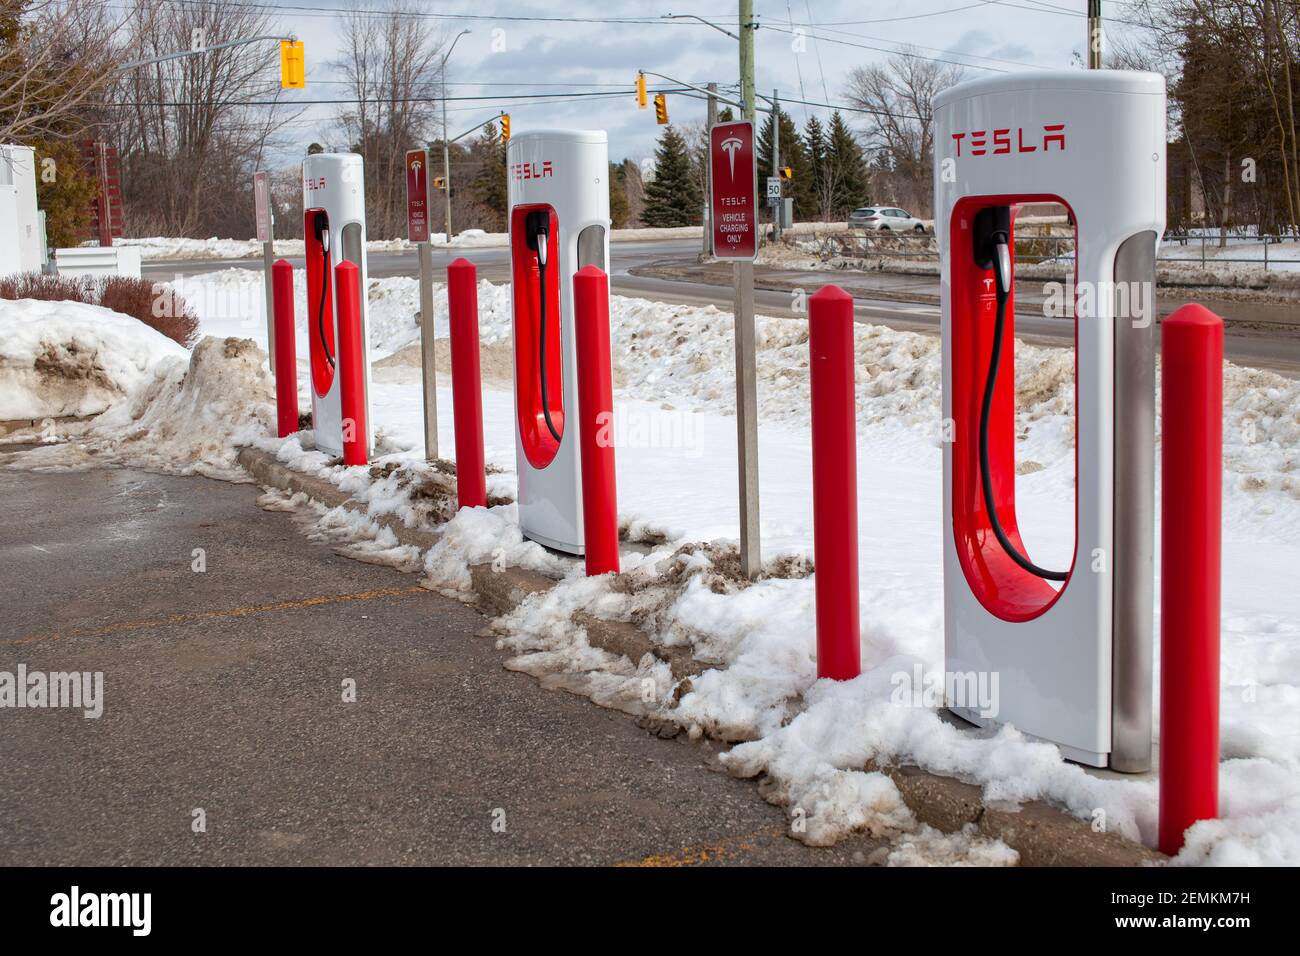 Collingwood, Ontario, Canada - 02-23-2021: Brand new Tesla EV electric car charging Supercharger stations line the parking lot at the Cranberry Mews s Stock Photo